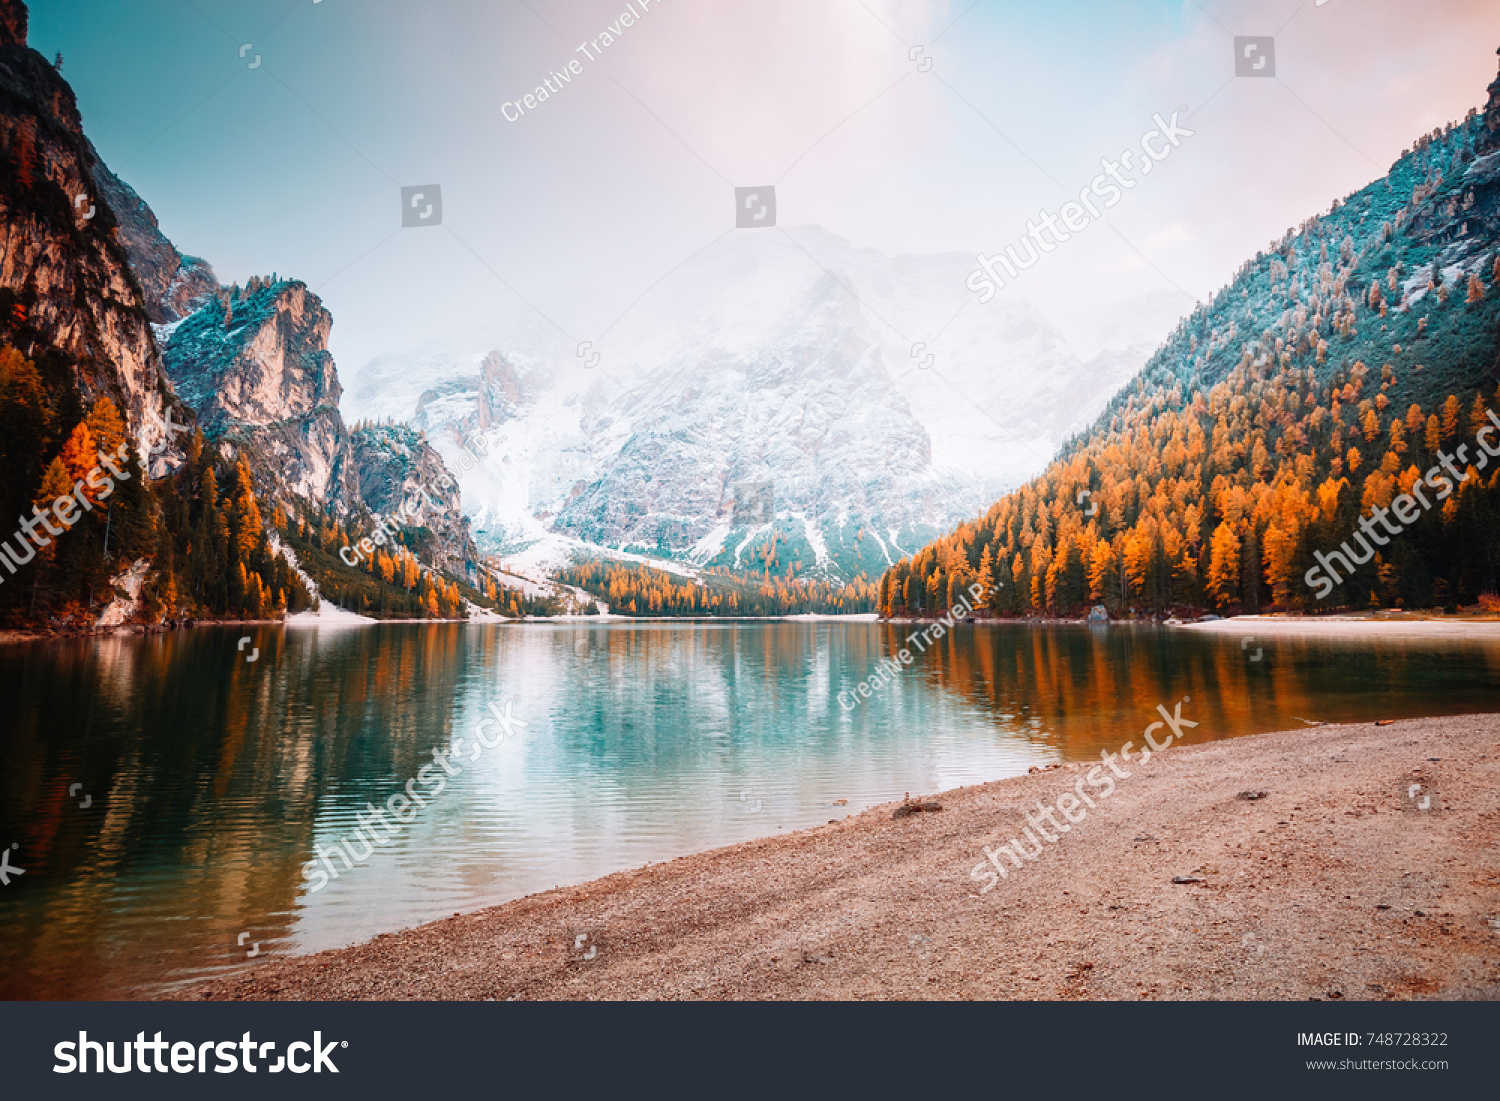 Scenic image of alpine lake Braies (Pragser Wildsee). Location place Dolomiti national park Fanes-Sennes-Braies, Italy, Europe. Great picture of wild. Explore the beauty of earth. Tourism concept.  #748728322